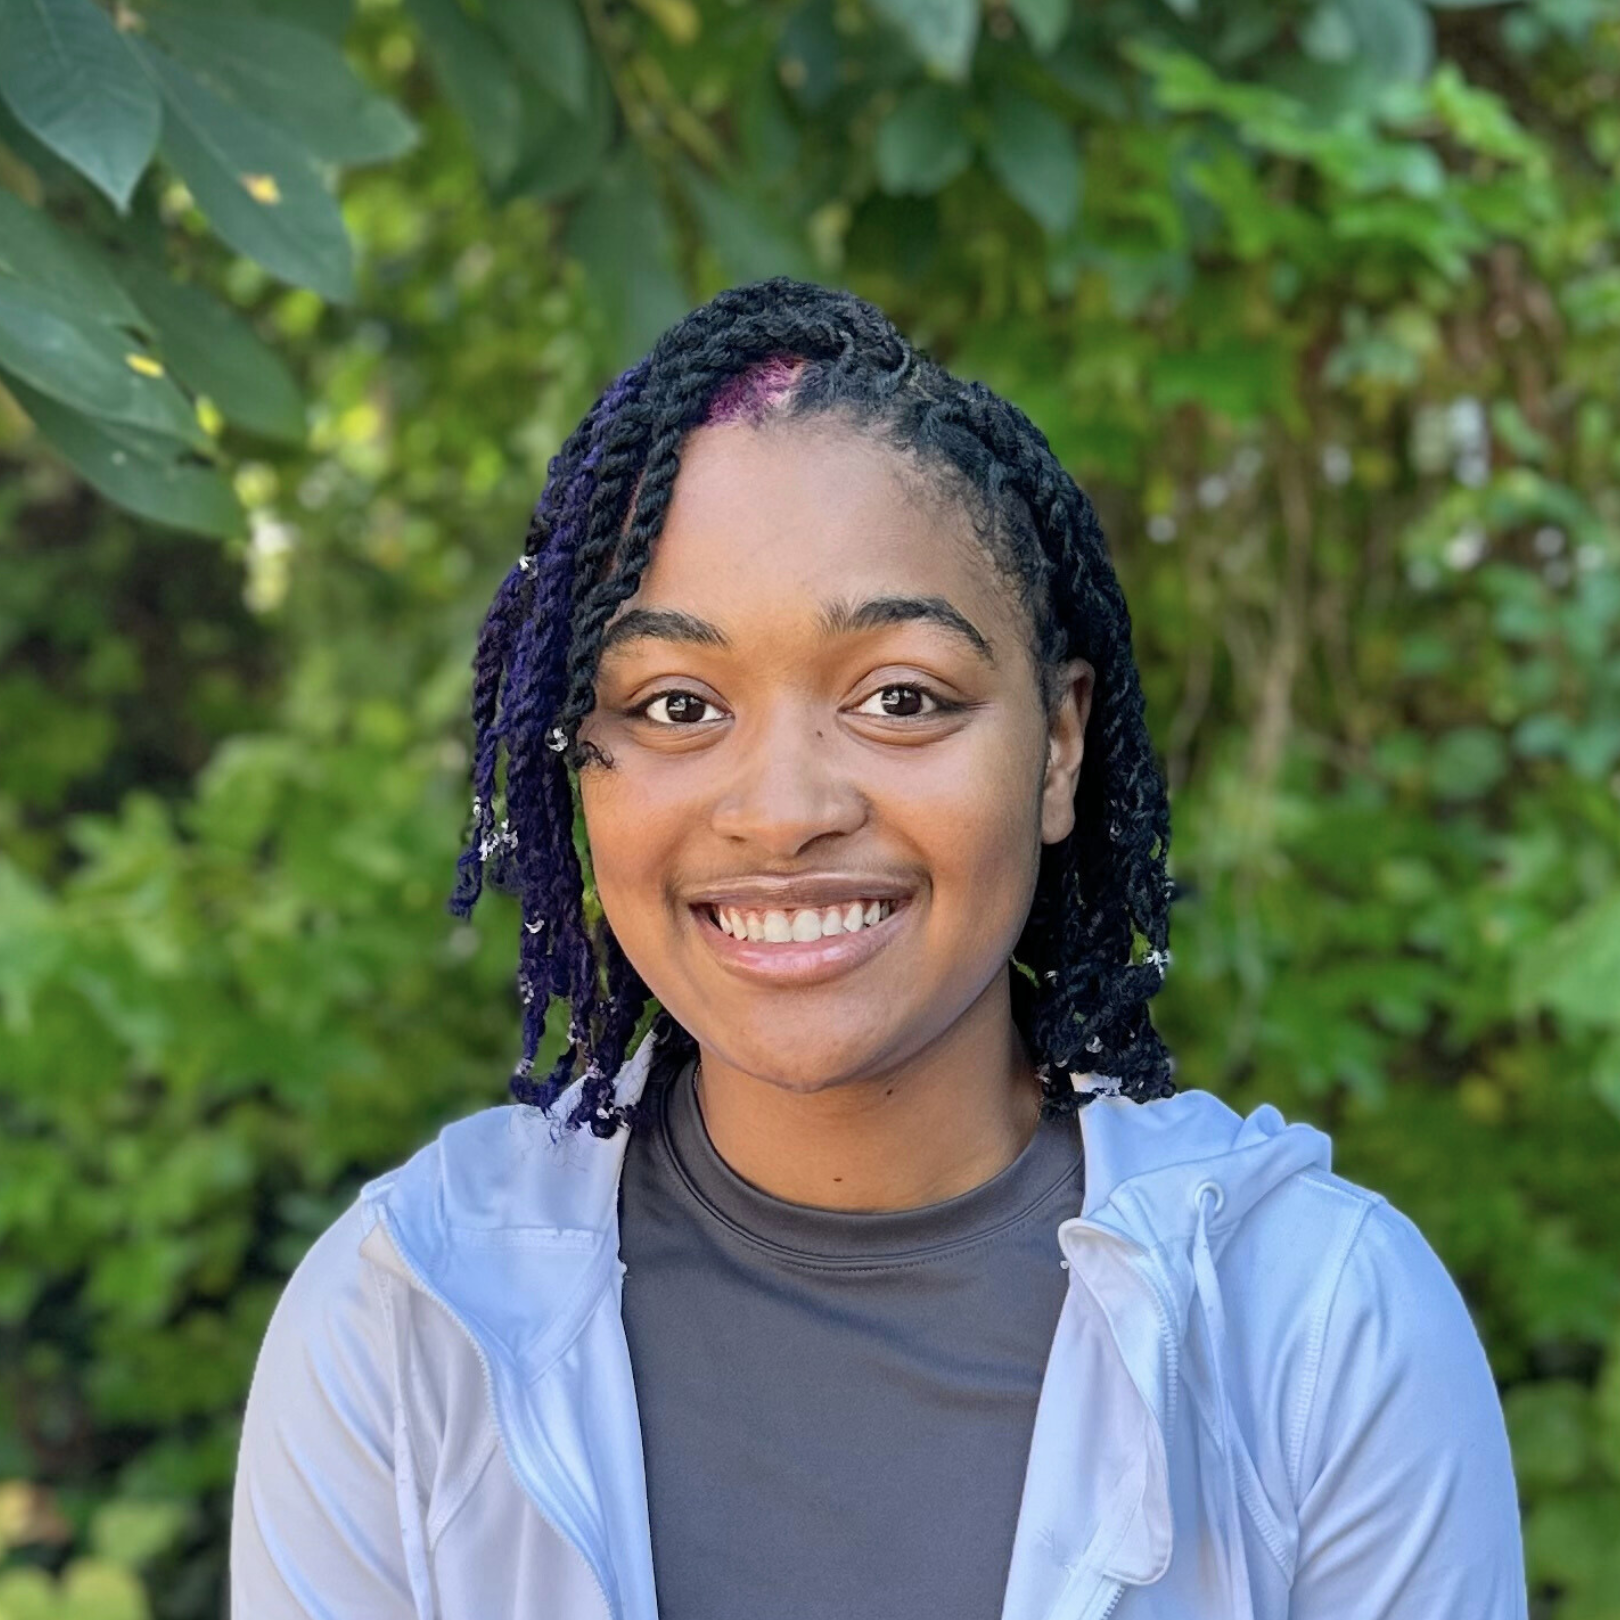 Meet Ladajah Harris, AS, our Medical Assistant at Advaita Integrated Medicine, which is part of the Advaita Collective, in Raleigh, North Carolina.